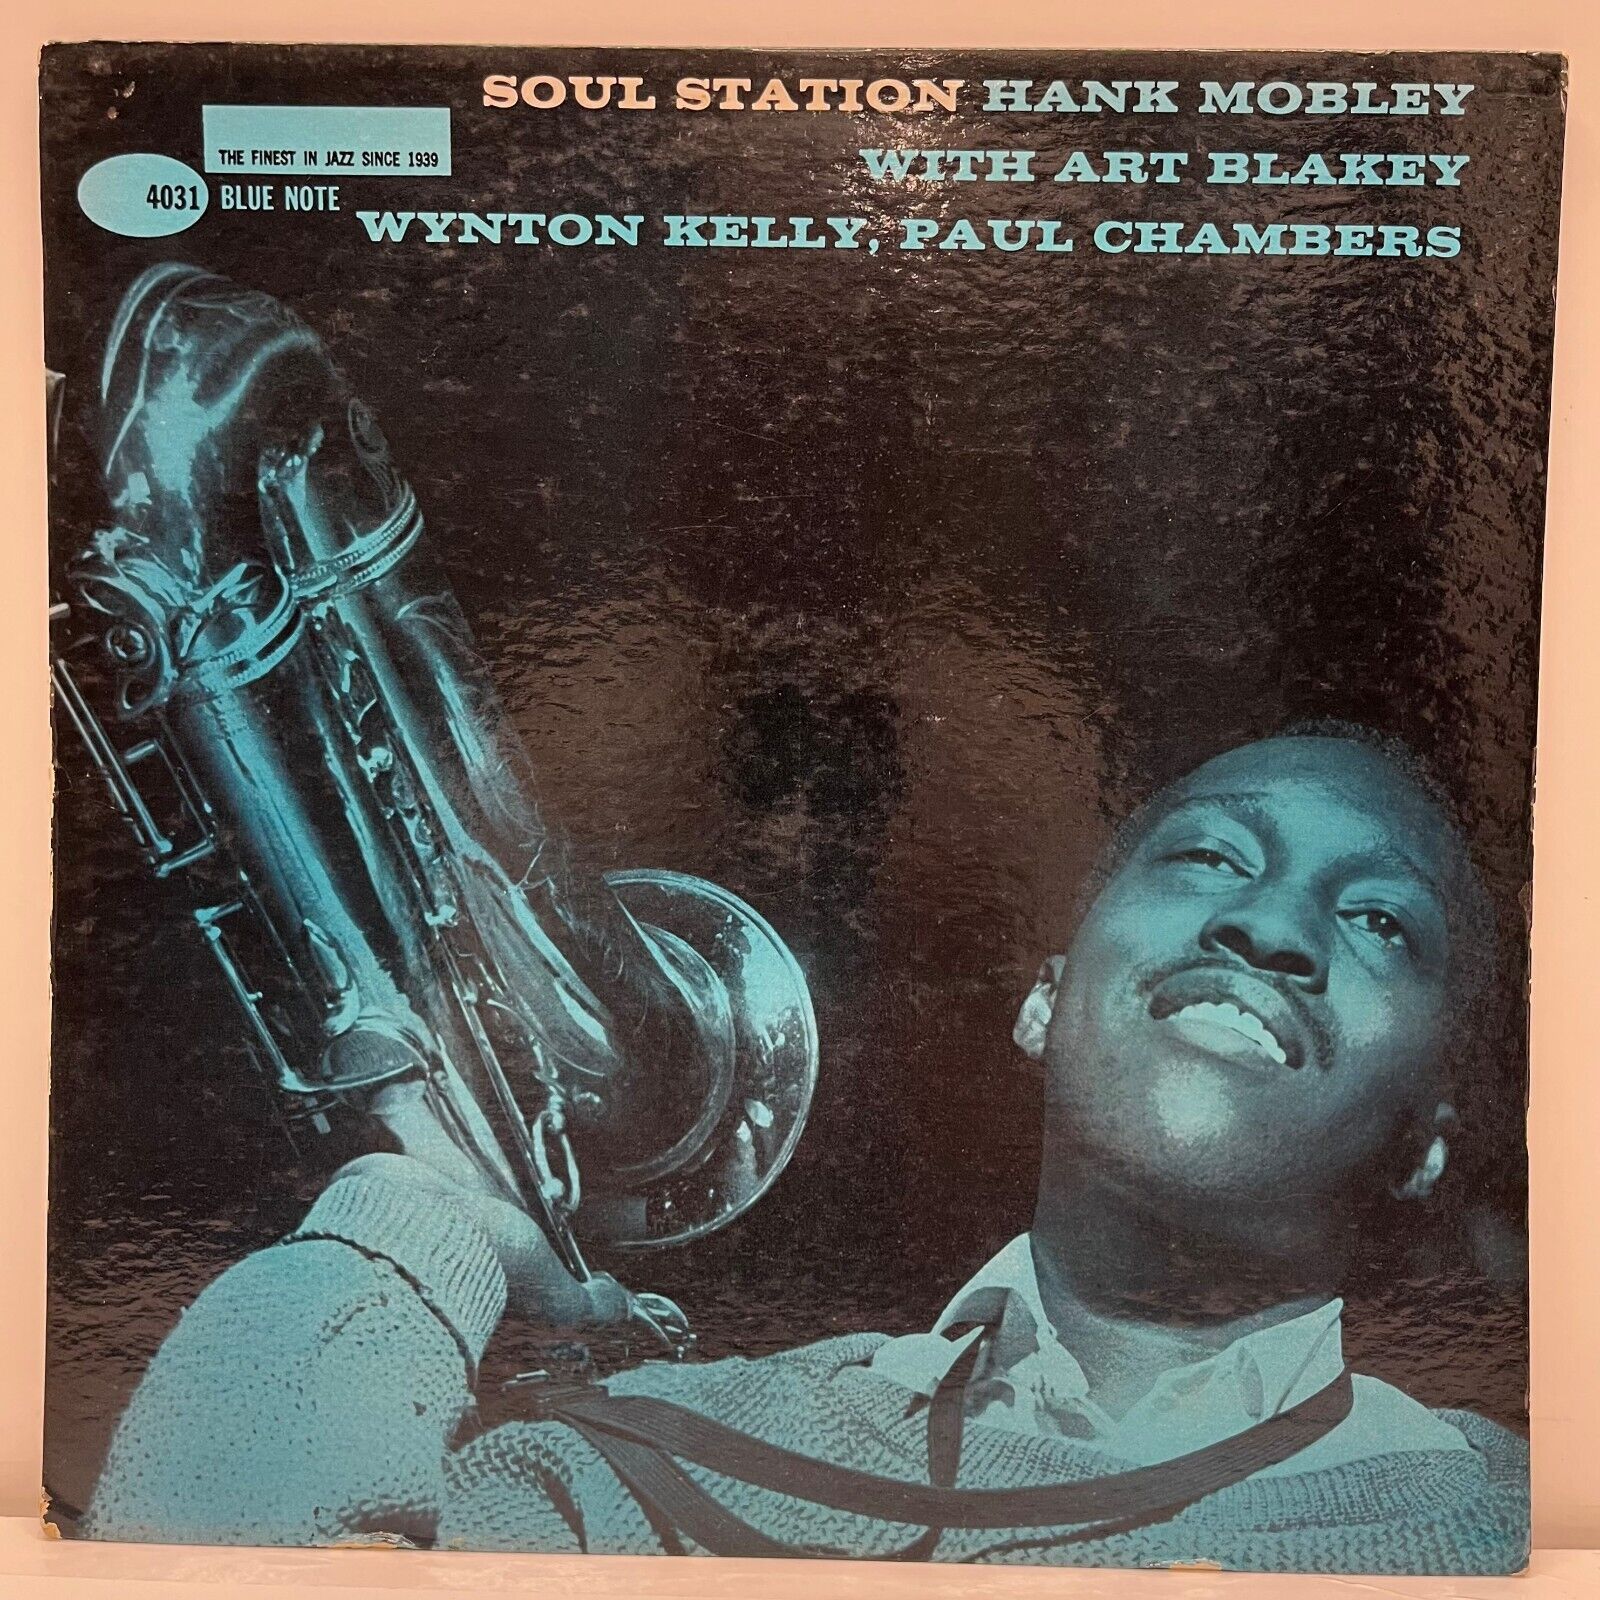 Pic 1 Hank Mobley on Blue Note 4031